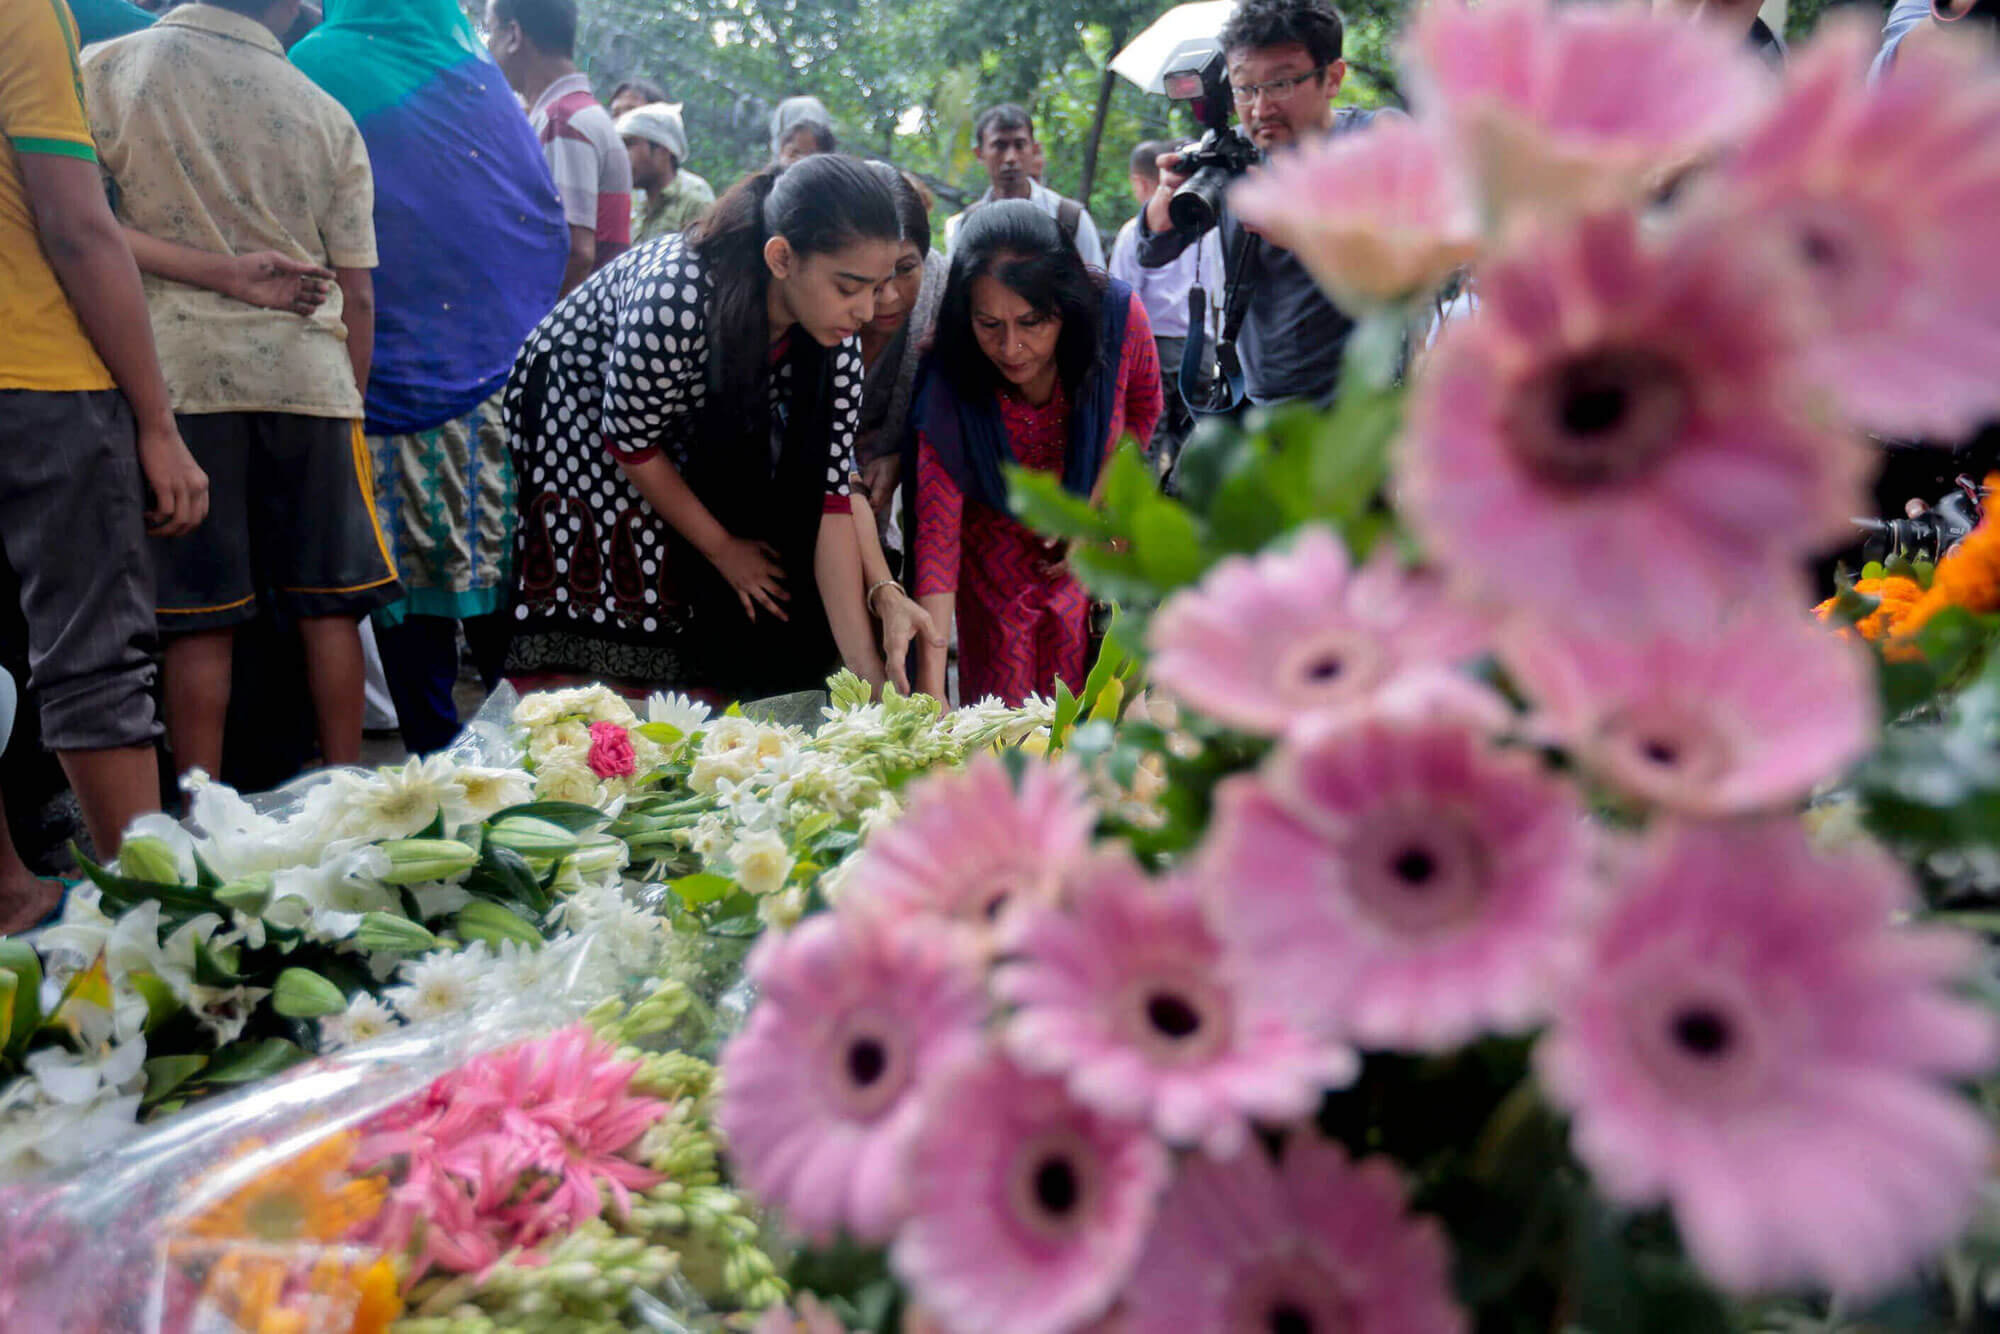 Memorial of flowers set up for the vicitms of the Bangladesh attack.